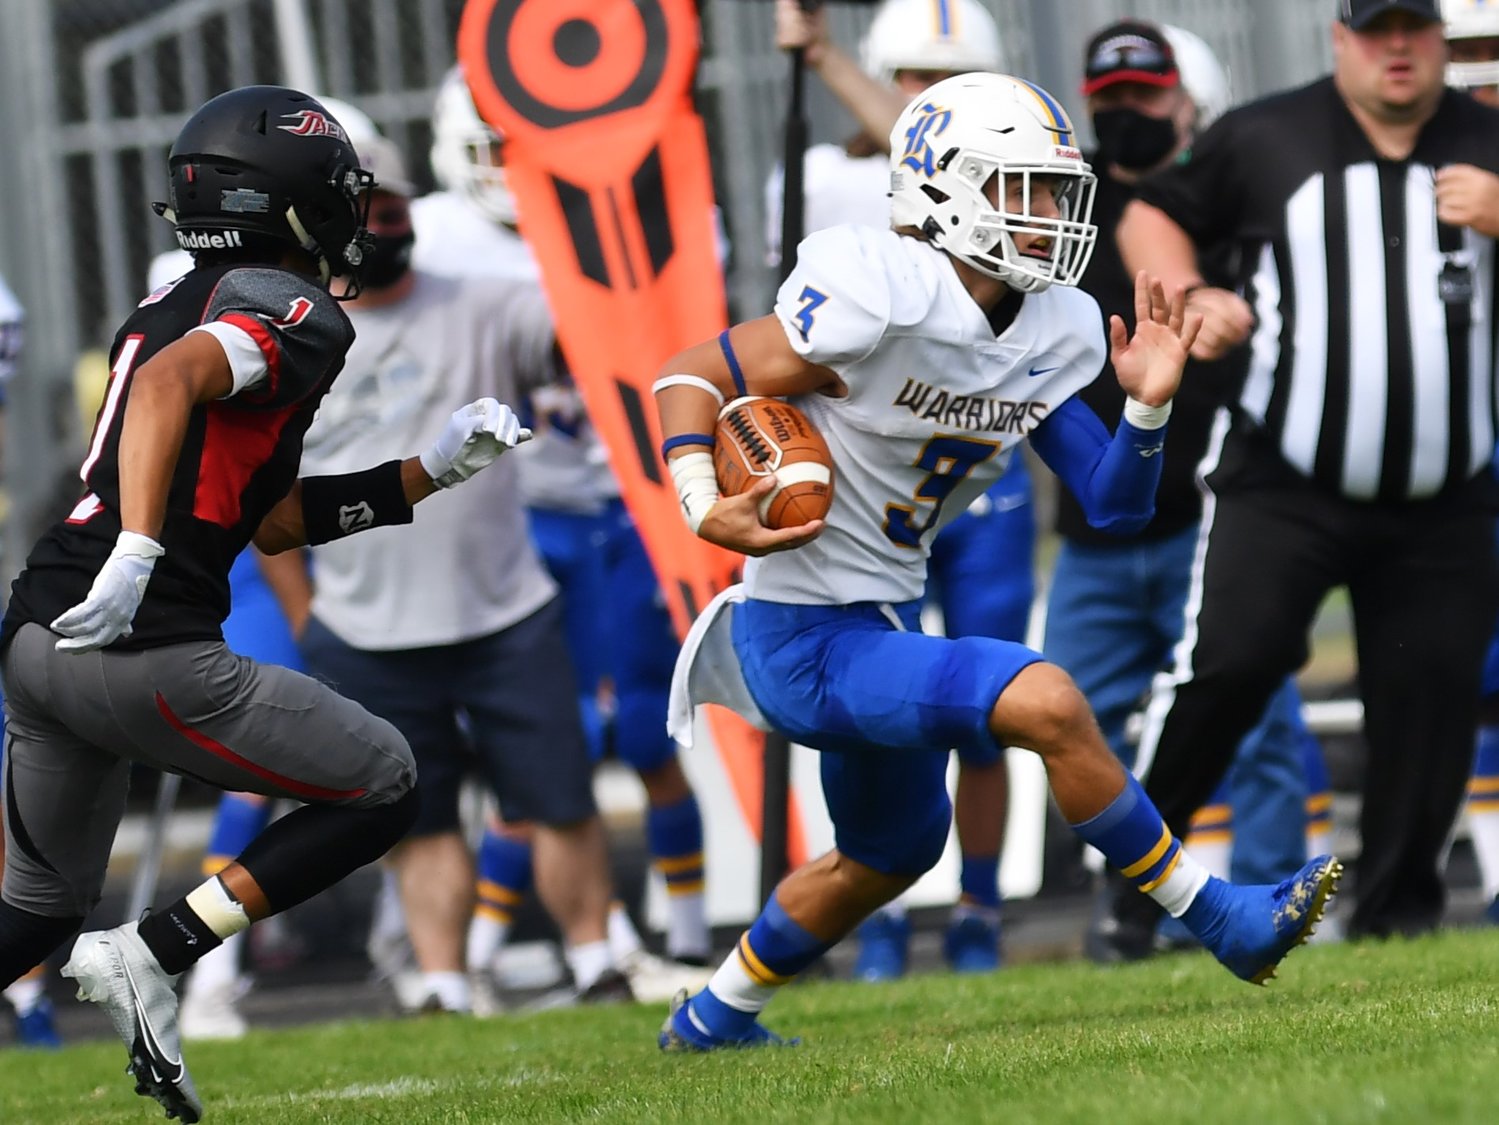 Rochester tailback Talon Betts flies past an R.A. Long defender near the sideline on Saturday during the Warriors' 42-20 victory.